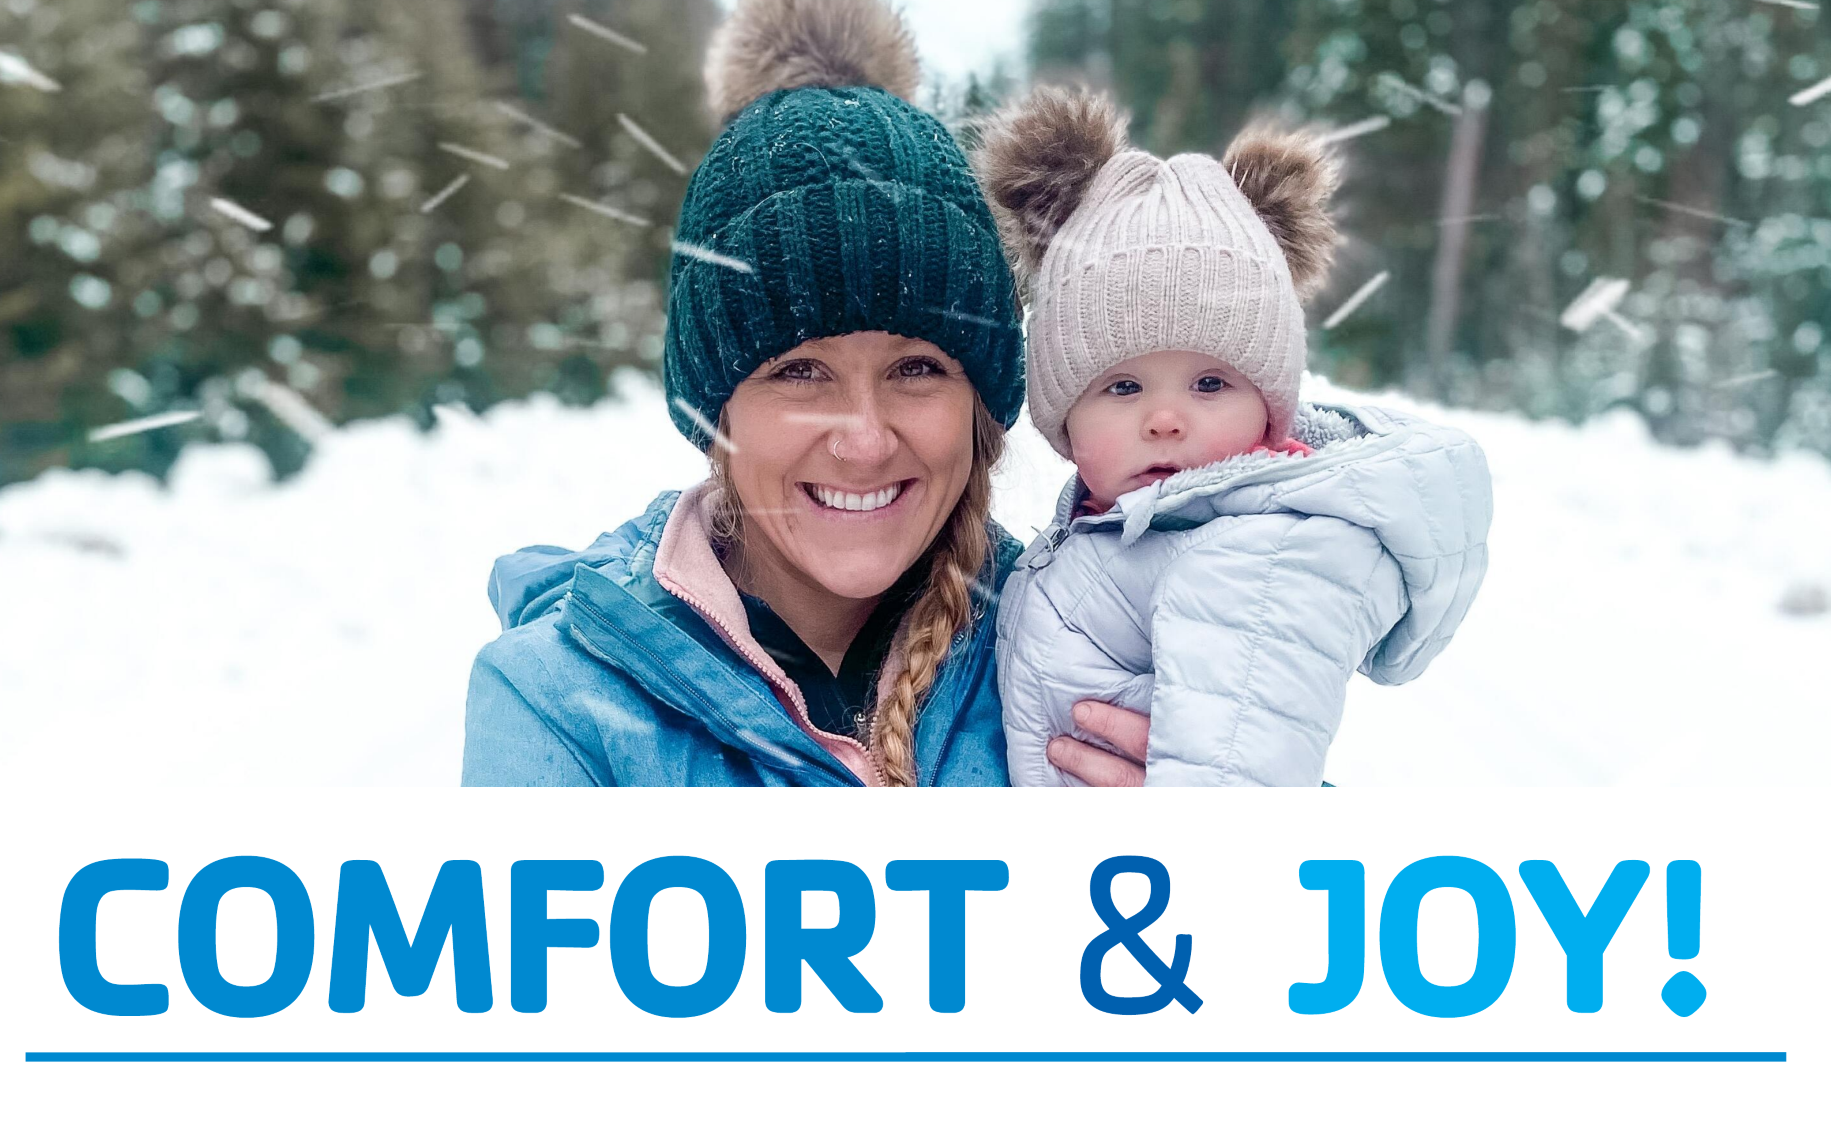 Mother and daughter in winter clothes, text: Comfort & Joy!